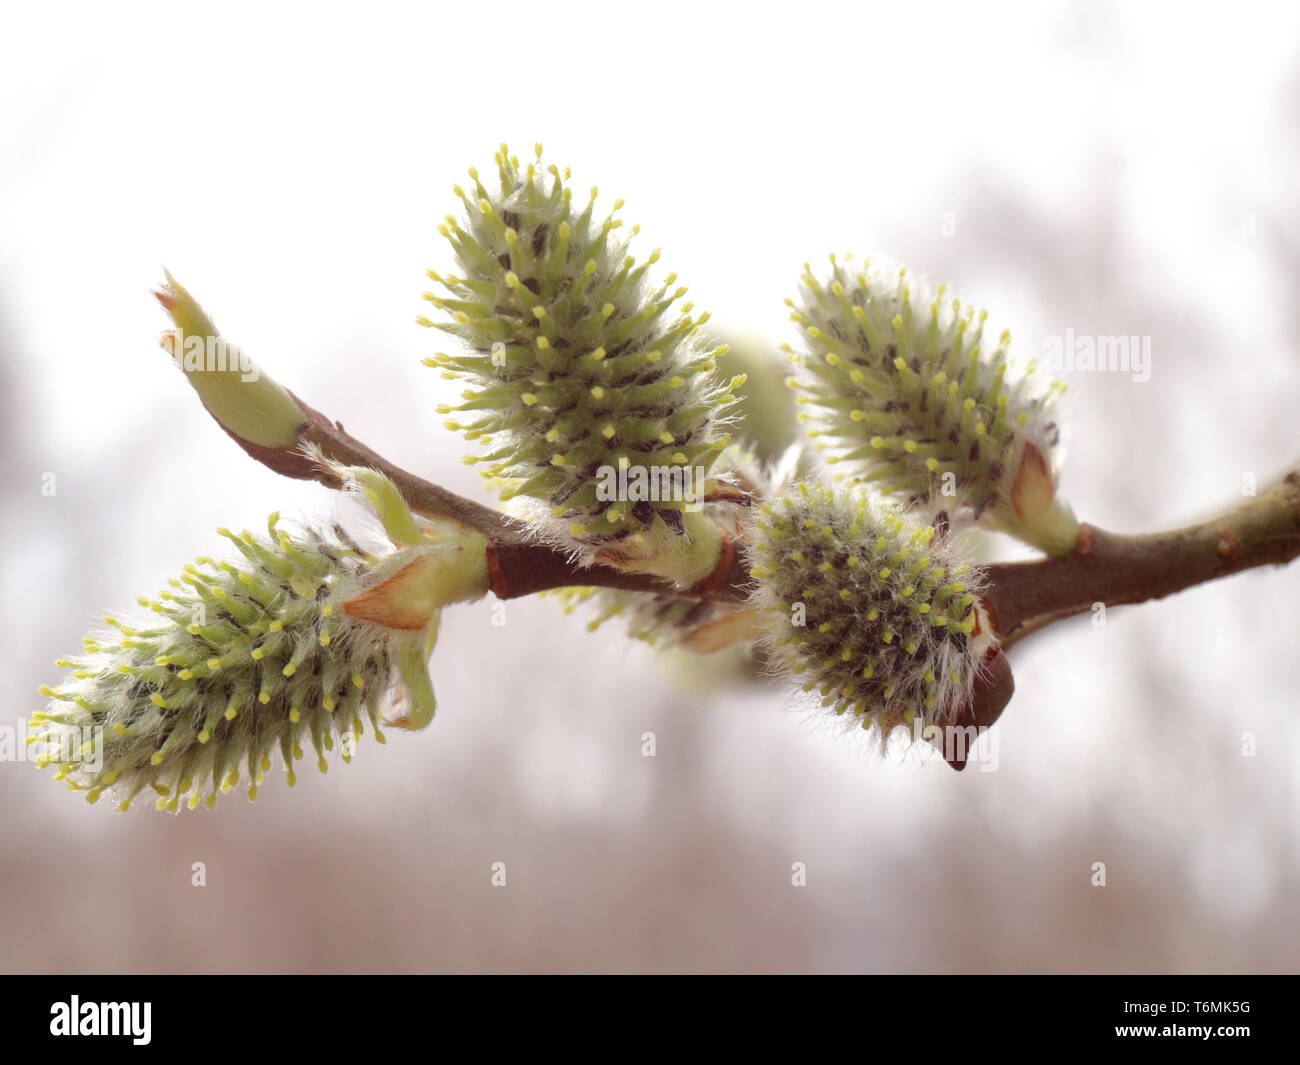 Salix alba. Salix acutifolia. Photo of inflorescence of willow in a cloudy spring day. Can be used for calendars or greeting cards. Good for designers Stock Photo